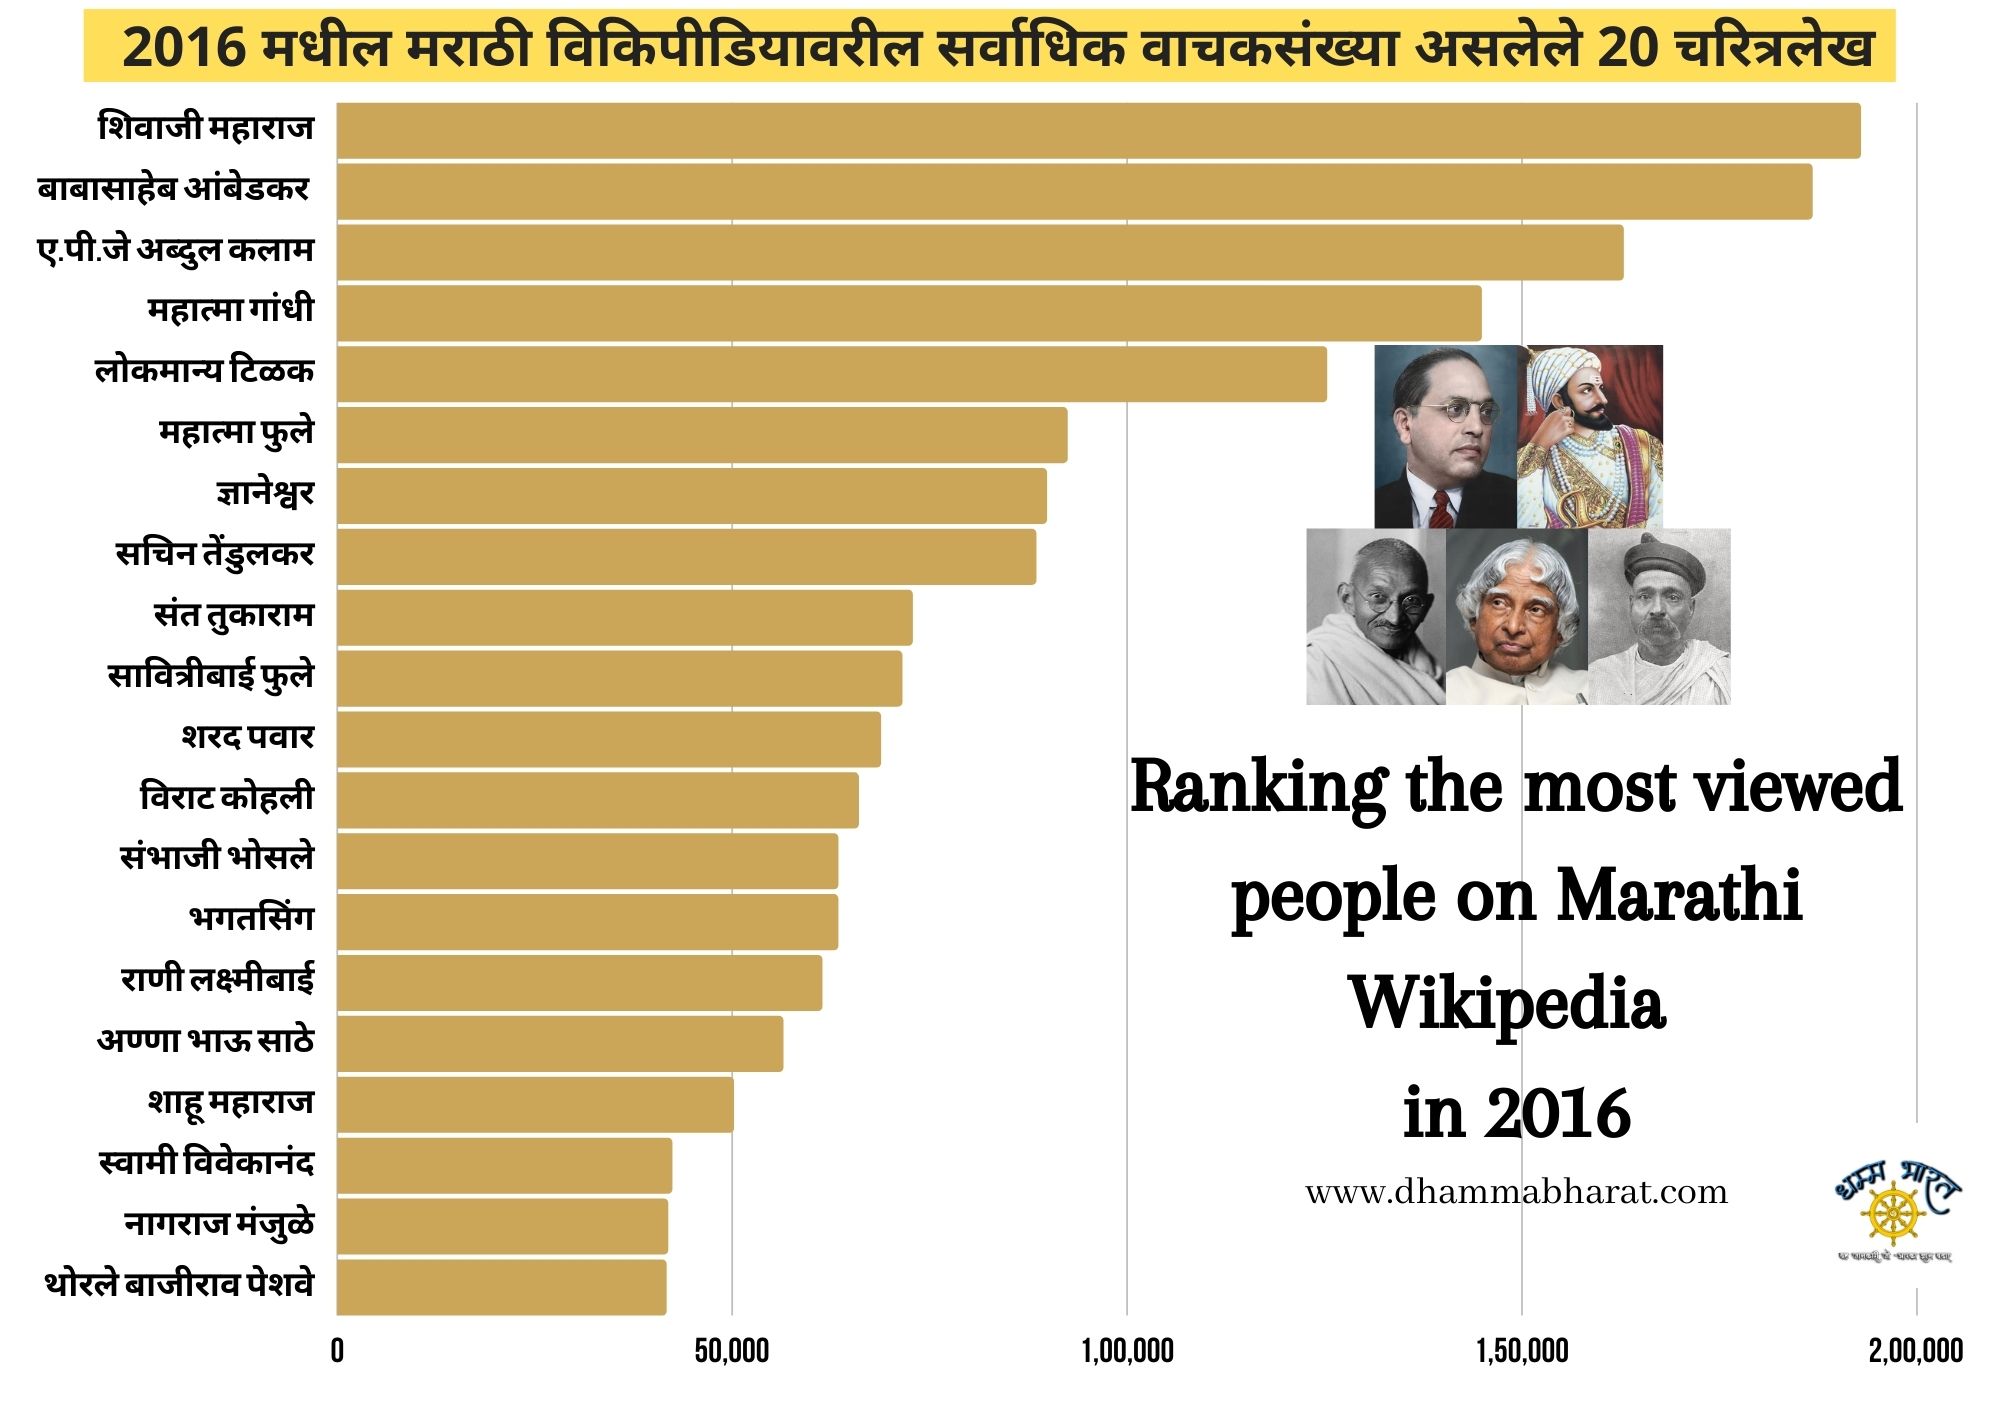  Ranking the most viewed people on Marathi Wikipedia in 2016